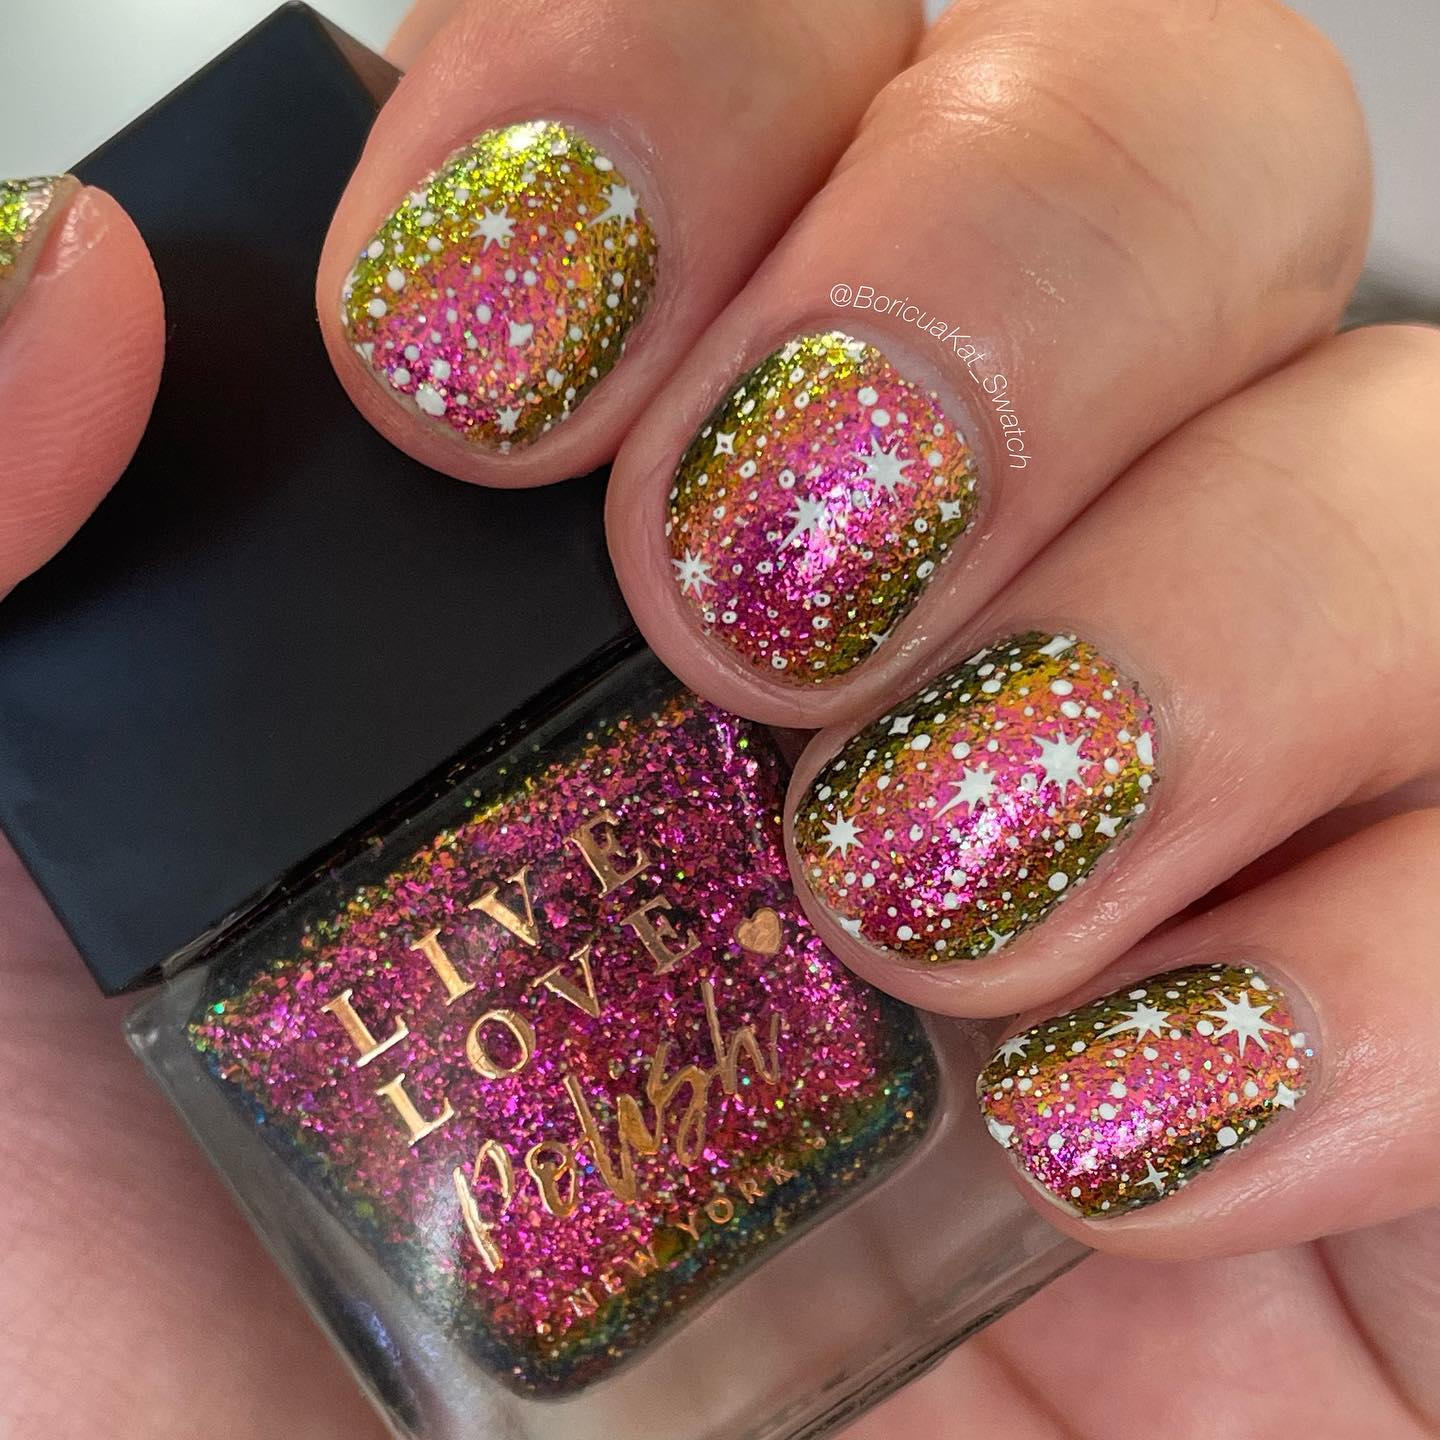 Shimmer nails are a type of nail polish that has a high-gloss finish and reflects light. Colorful shimmers will give the look of crystals on the nails. You can use them for any occasion, whether it's a wedding or just to go out with your friends!